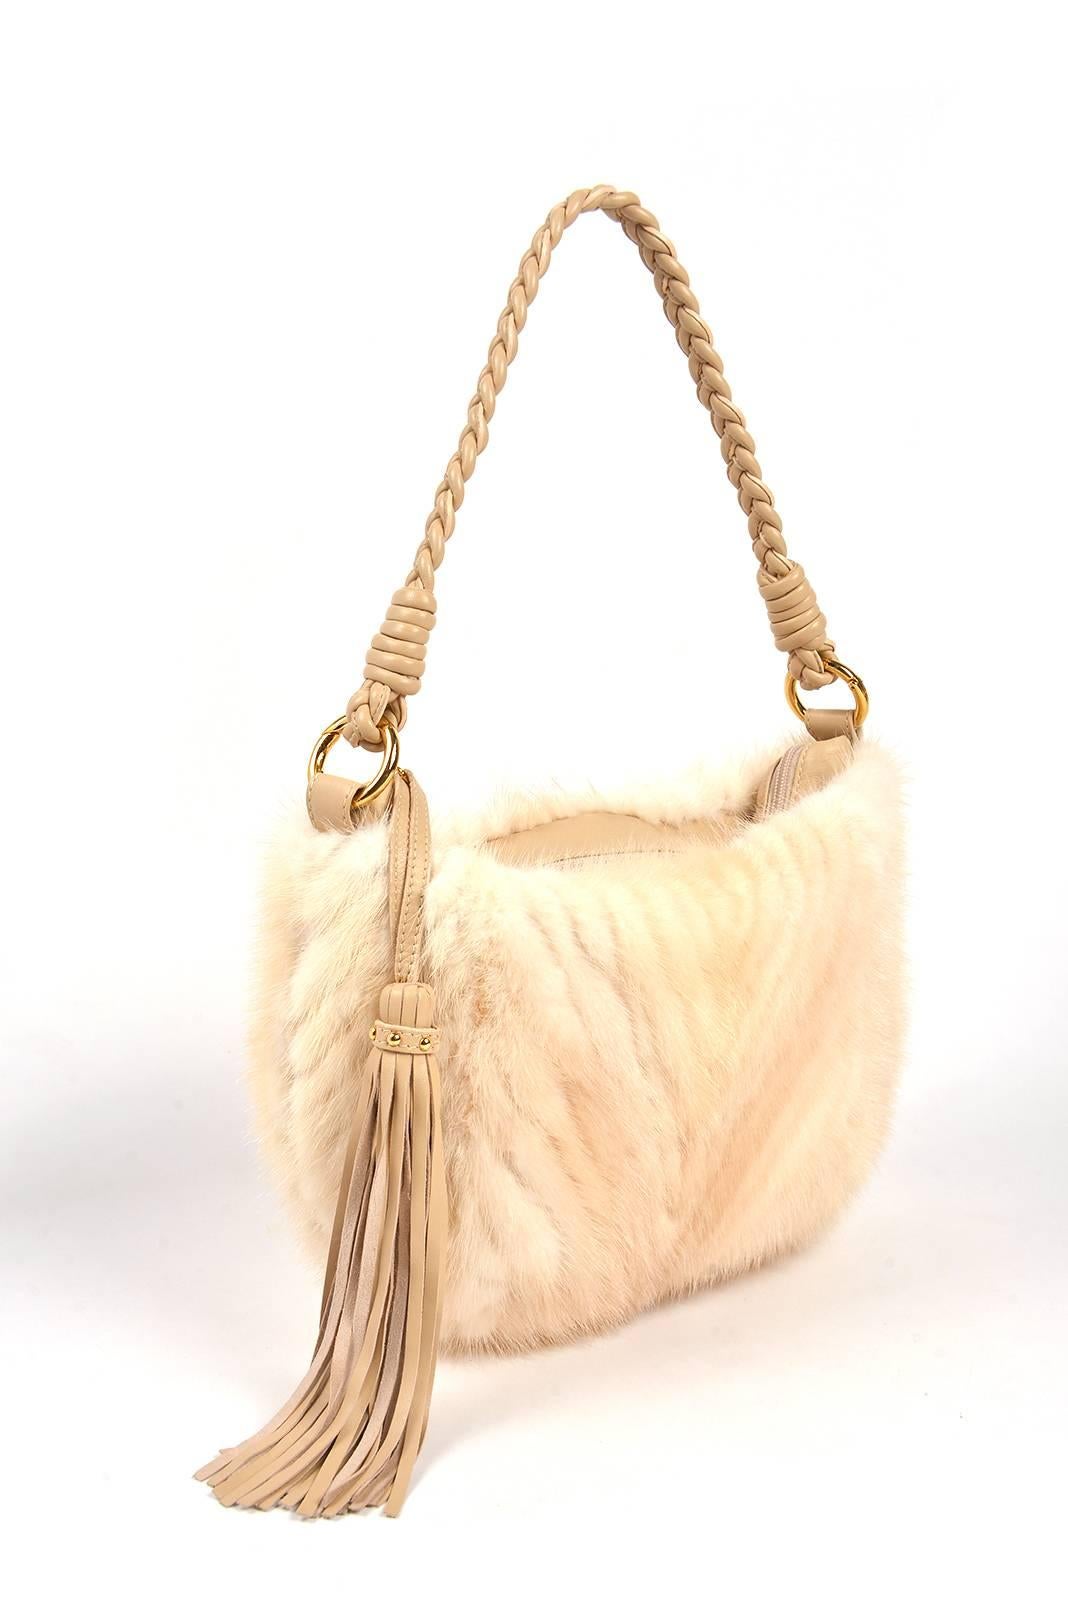 Paolo Masi White Mink and Leather Hobo Style Bag. Classy and fun for any fashionista! This white mink and tan leather hobo bag is fantastic. With a braided leather handle and long tassel. The tassel has six gold round balls on the tassel handle.